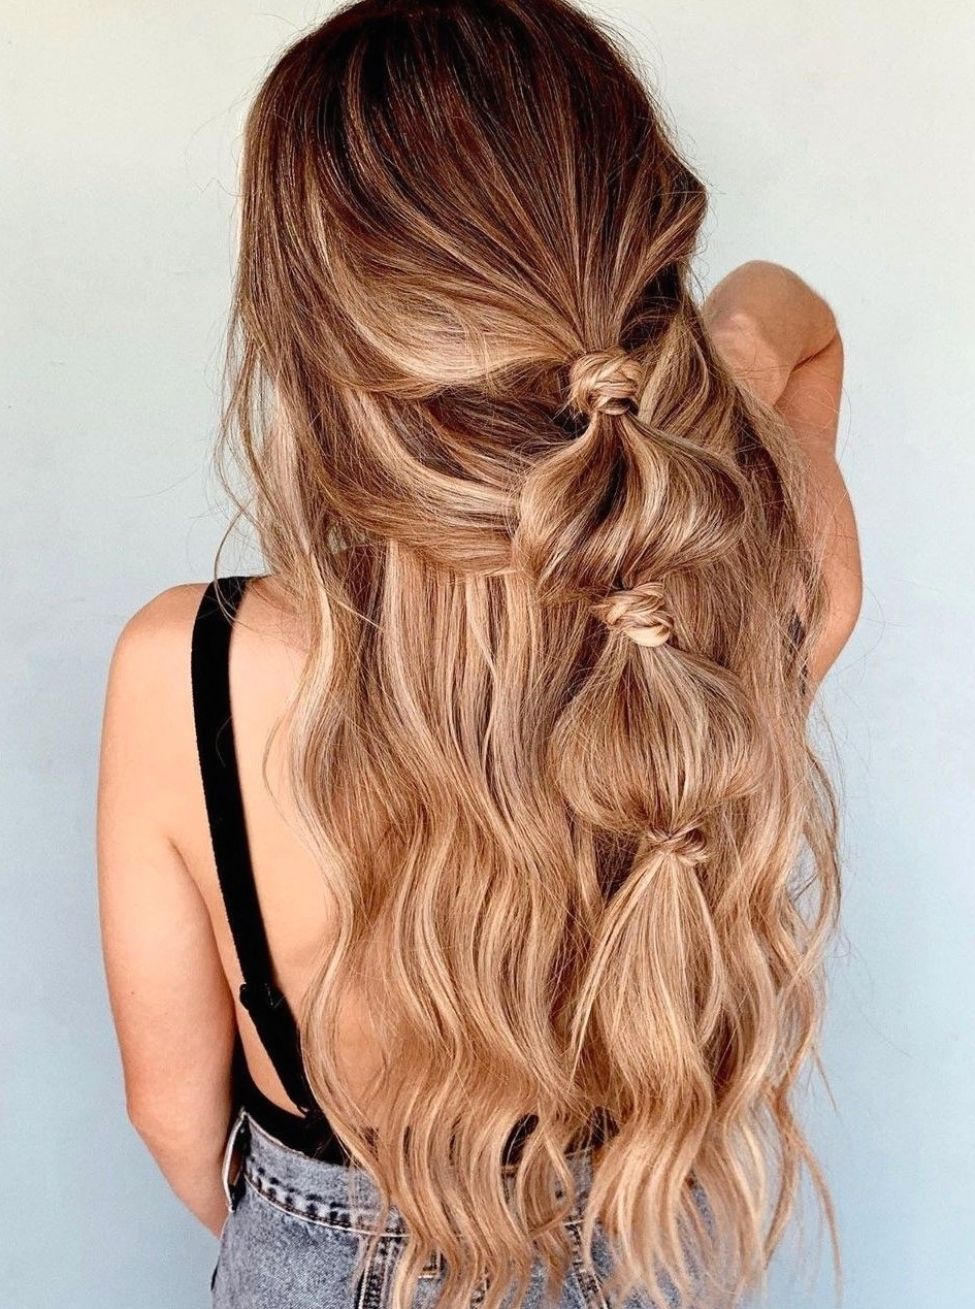 Half-up Hairstyles